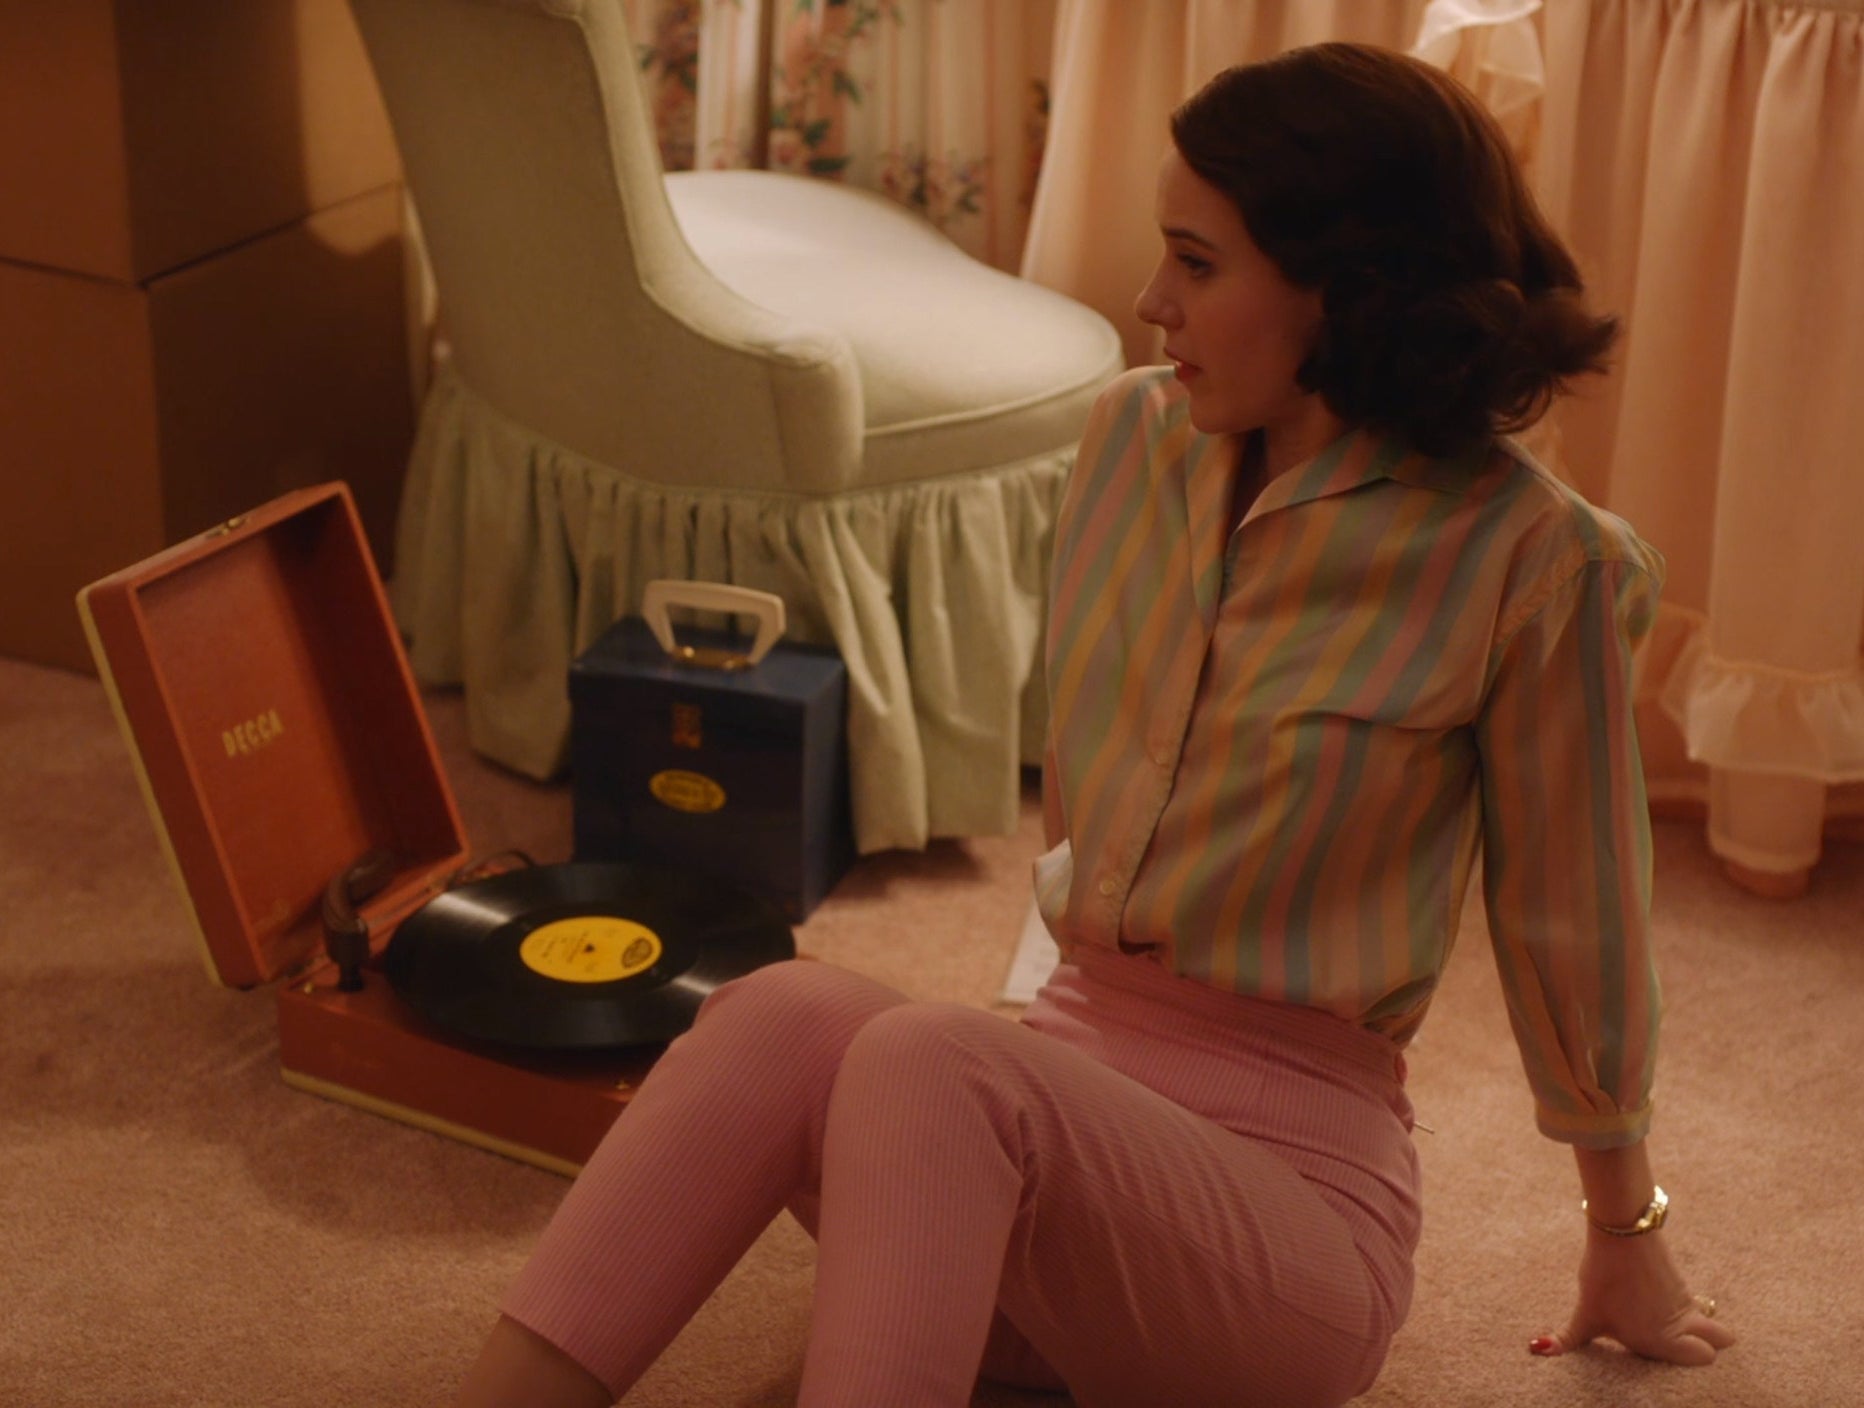 Screenshot from Mrs. Maisel shows Midge sitting on the floor listening to a record